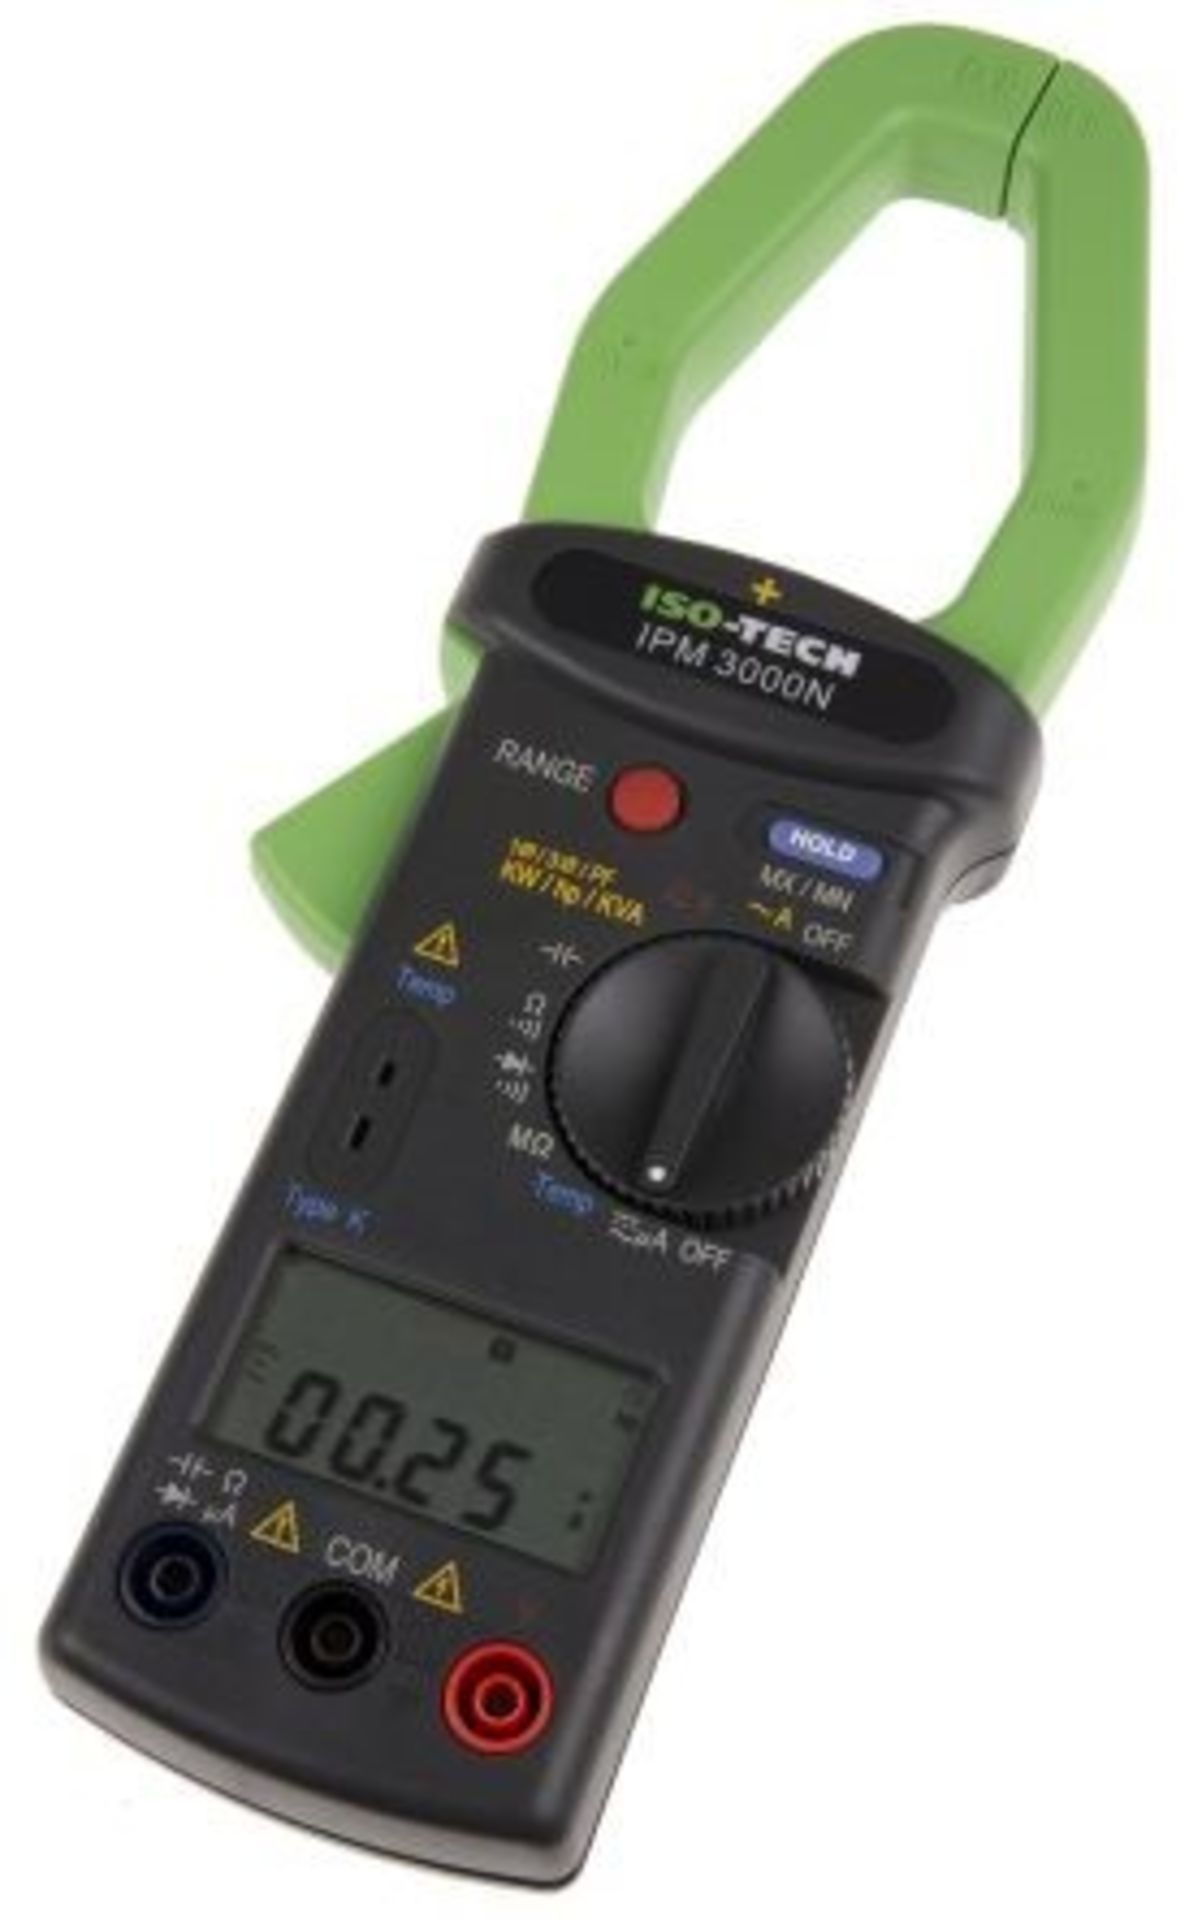 ISO-TECH IPM3000N HVAC Power Clamp Meter, Max Current 999.9A ac CAT III 600 V